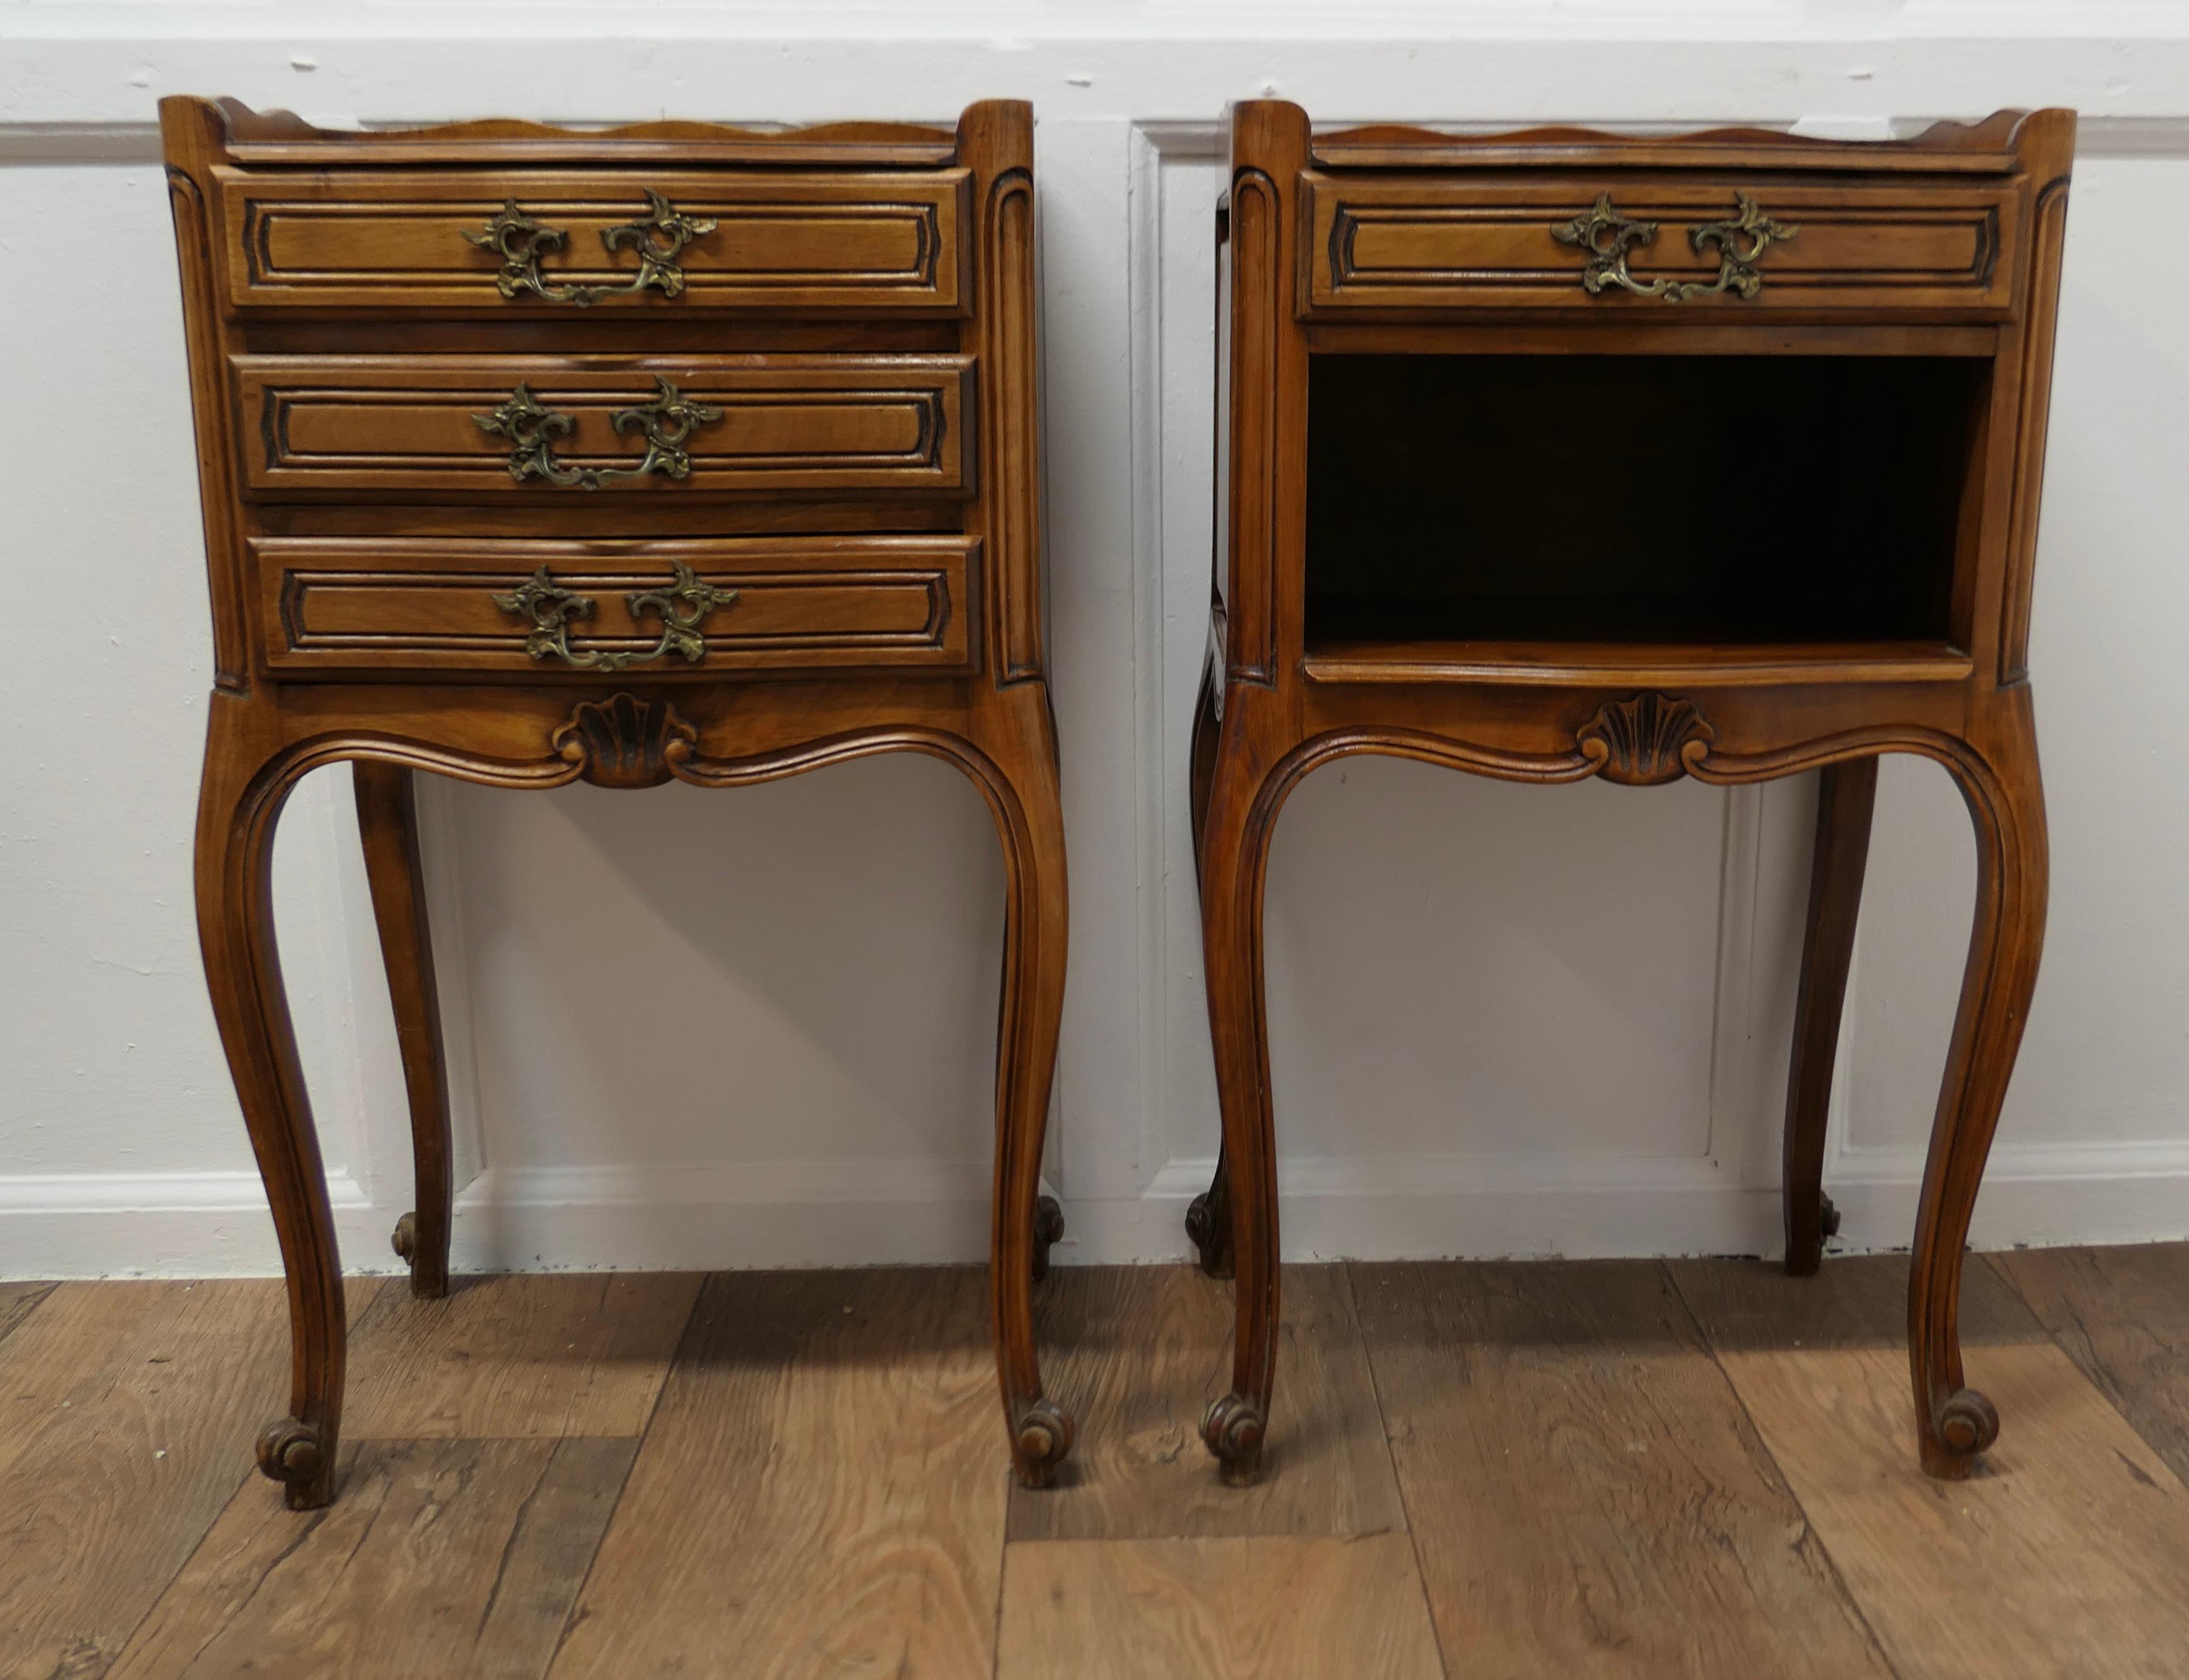 Early 20th Century Pair of French Cherry Wood Bedside Cabinets or Cupboards For Sale